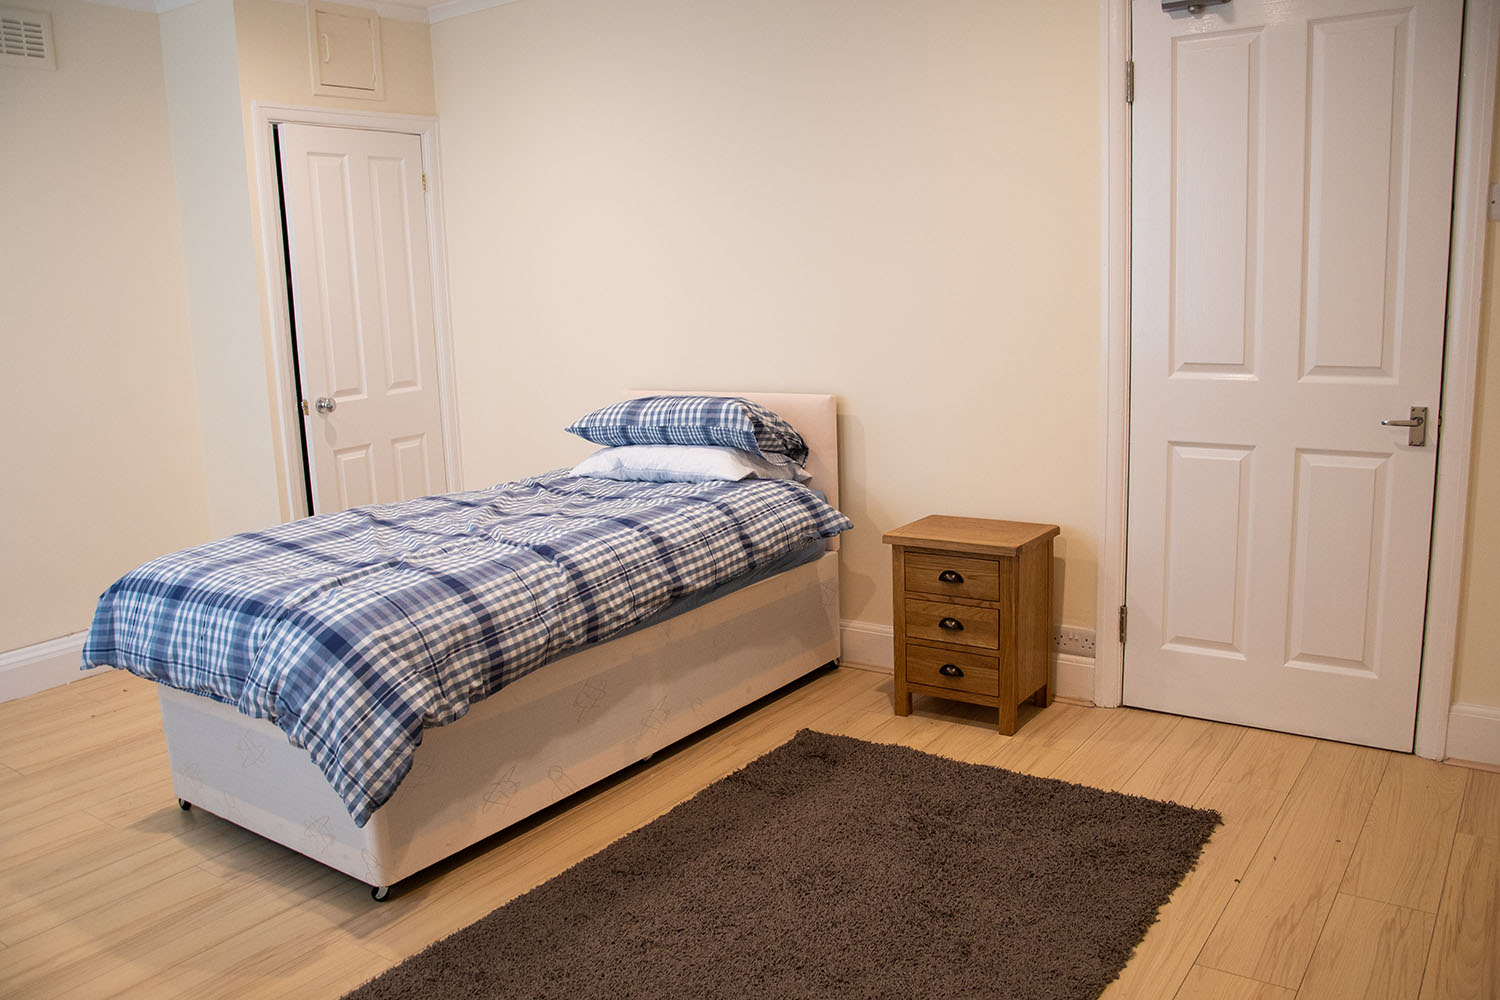 A bedroom with a single bed, bedside table and a brown rug in it